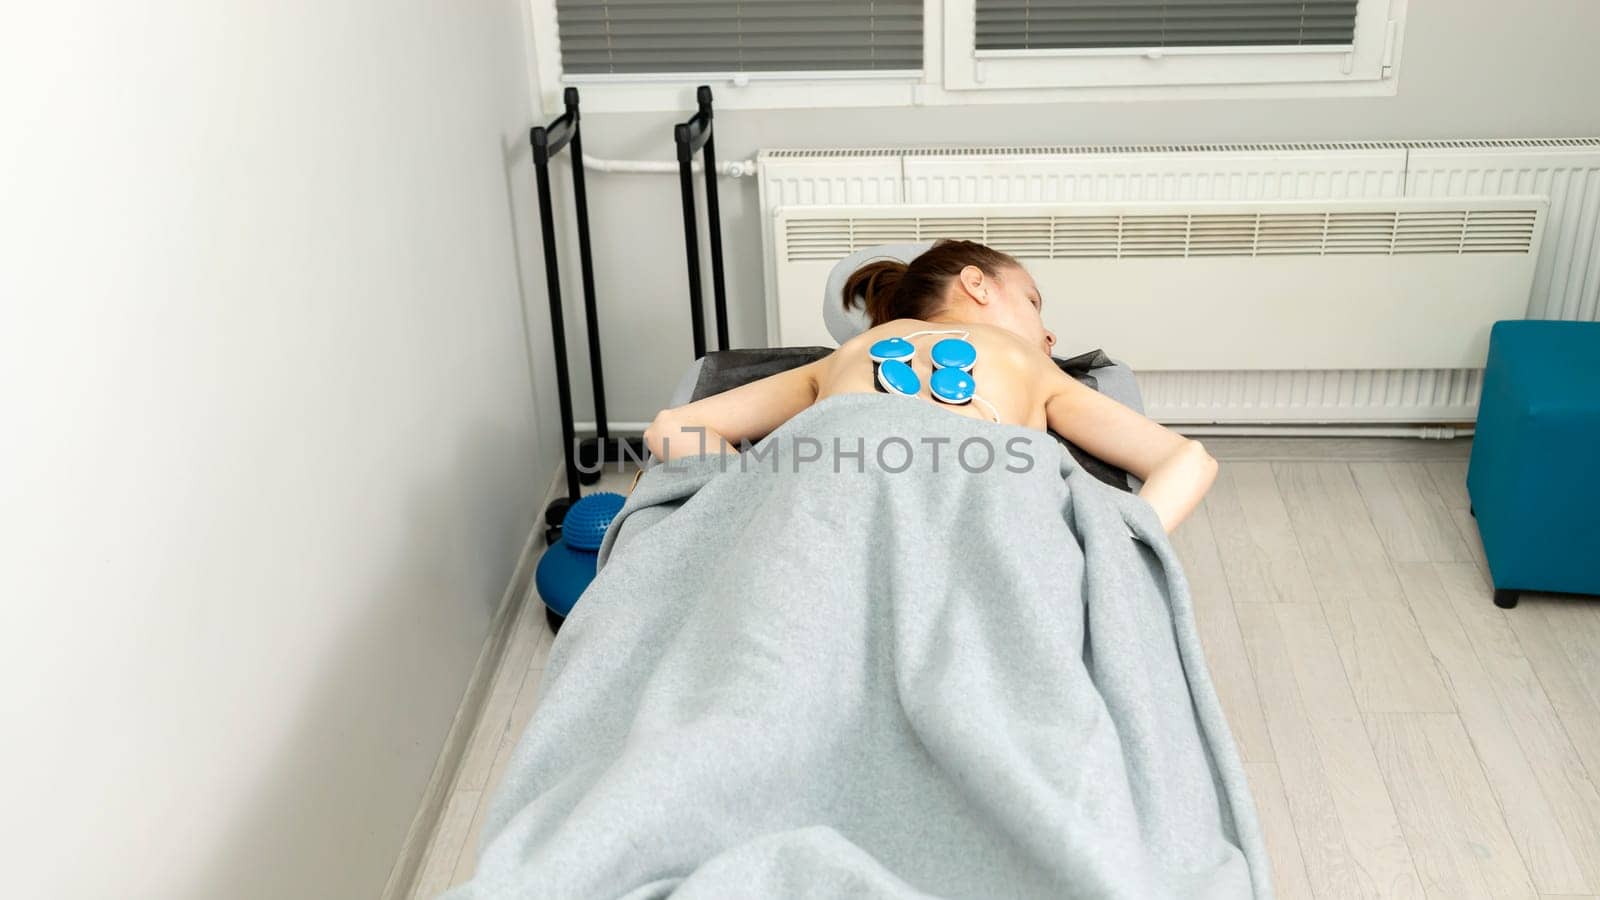 Young Woman With Cerebral Palsy, Scoliosis Lying on Couch Under Wireless Electric Muscle Stimulator, Getting Massage. Pain Treatment of Woman's Back. Rehabilitation,Medical Equipment.Horizontal plane.